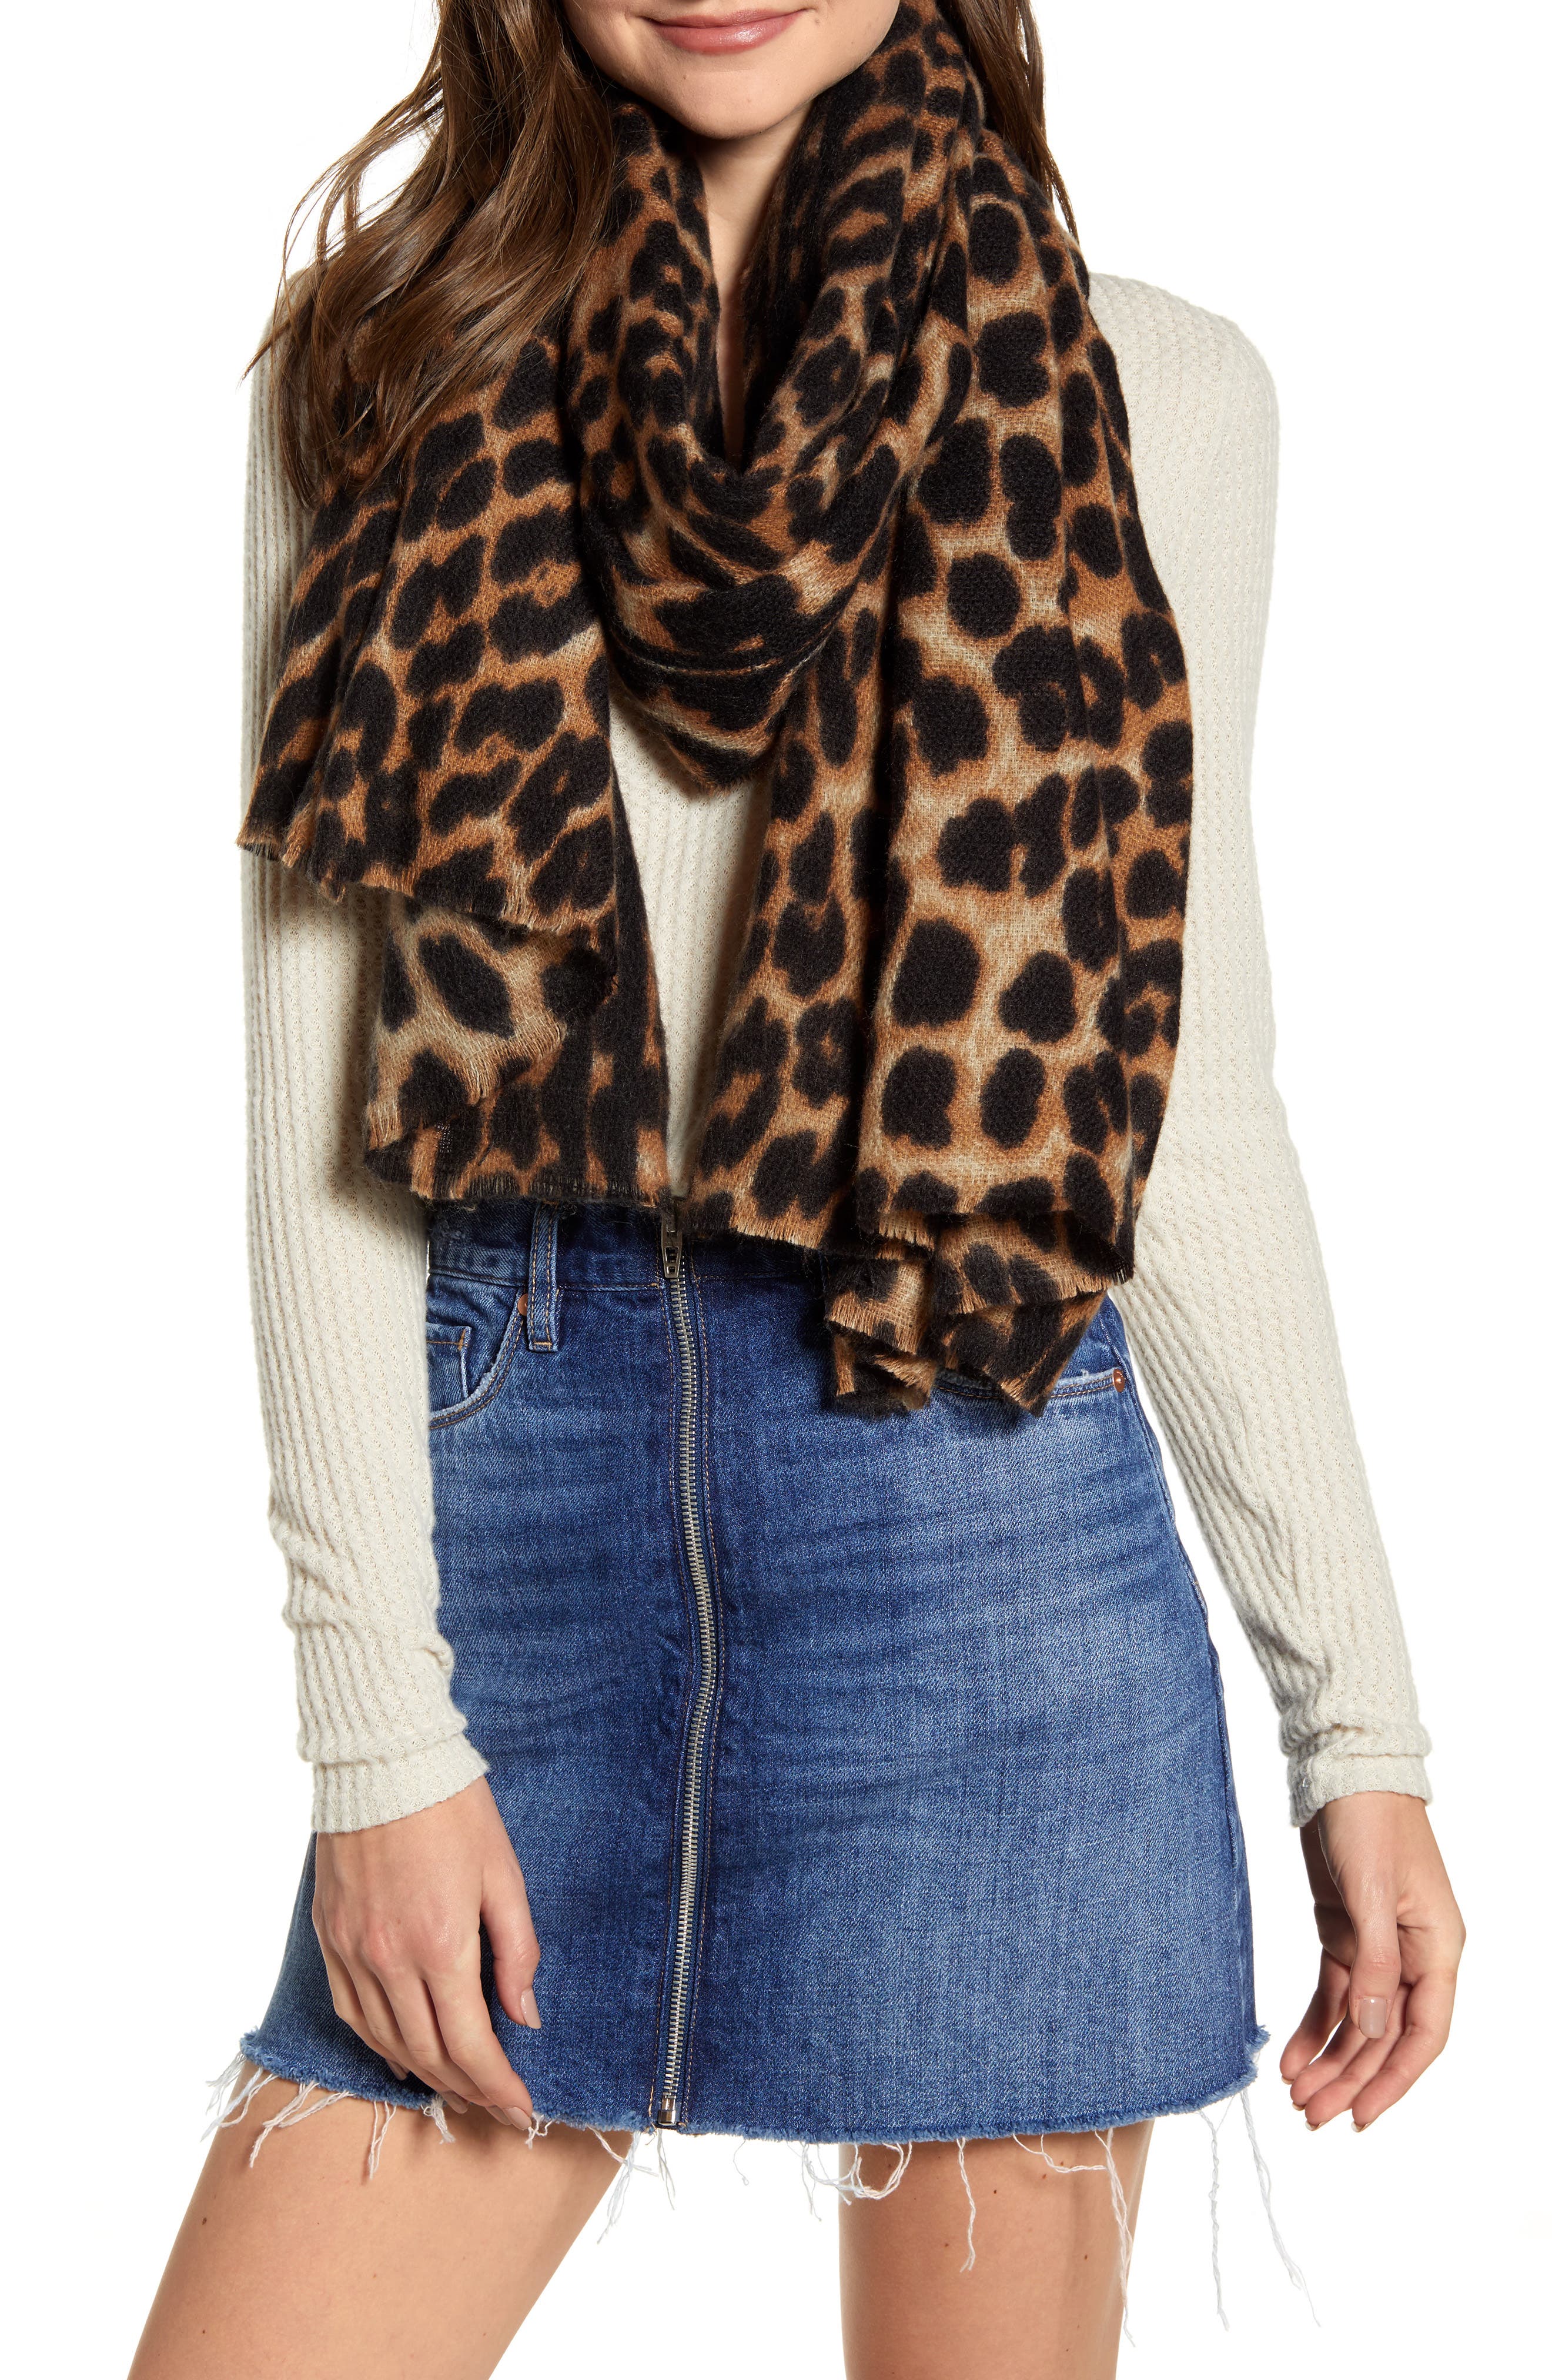 14 Best Fall Scarves - Oversized, Silk, and Plaid Scarves for Women